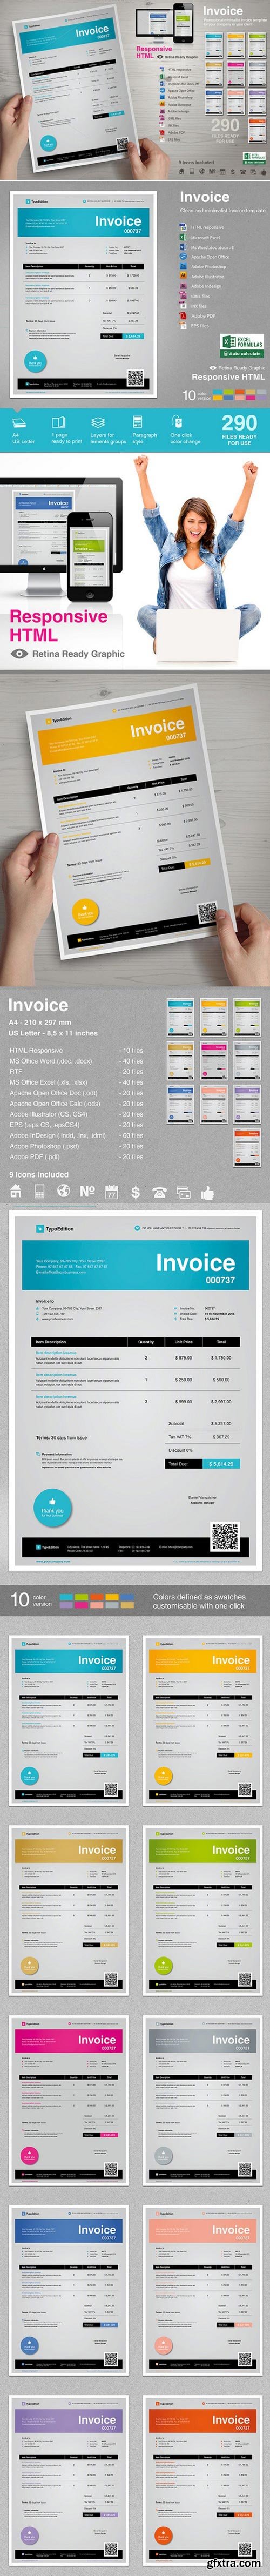 CM - Invoice Stationery Template 407743